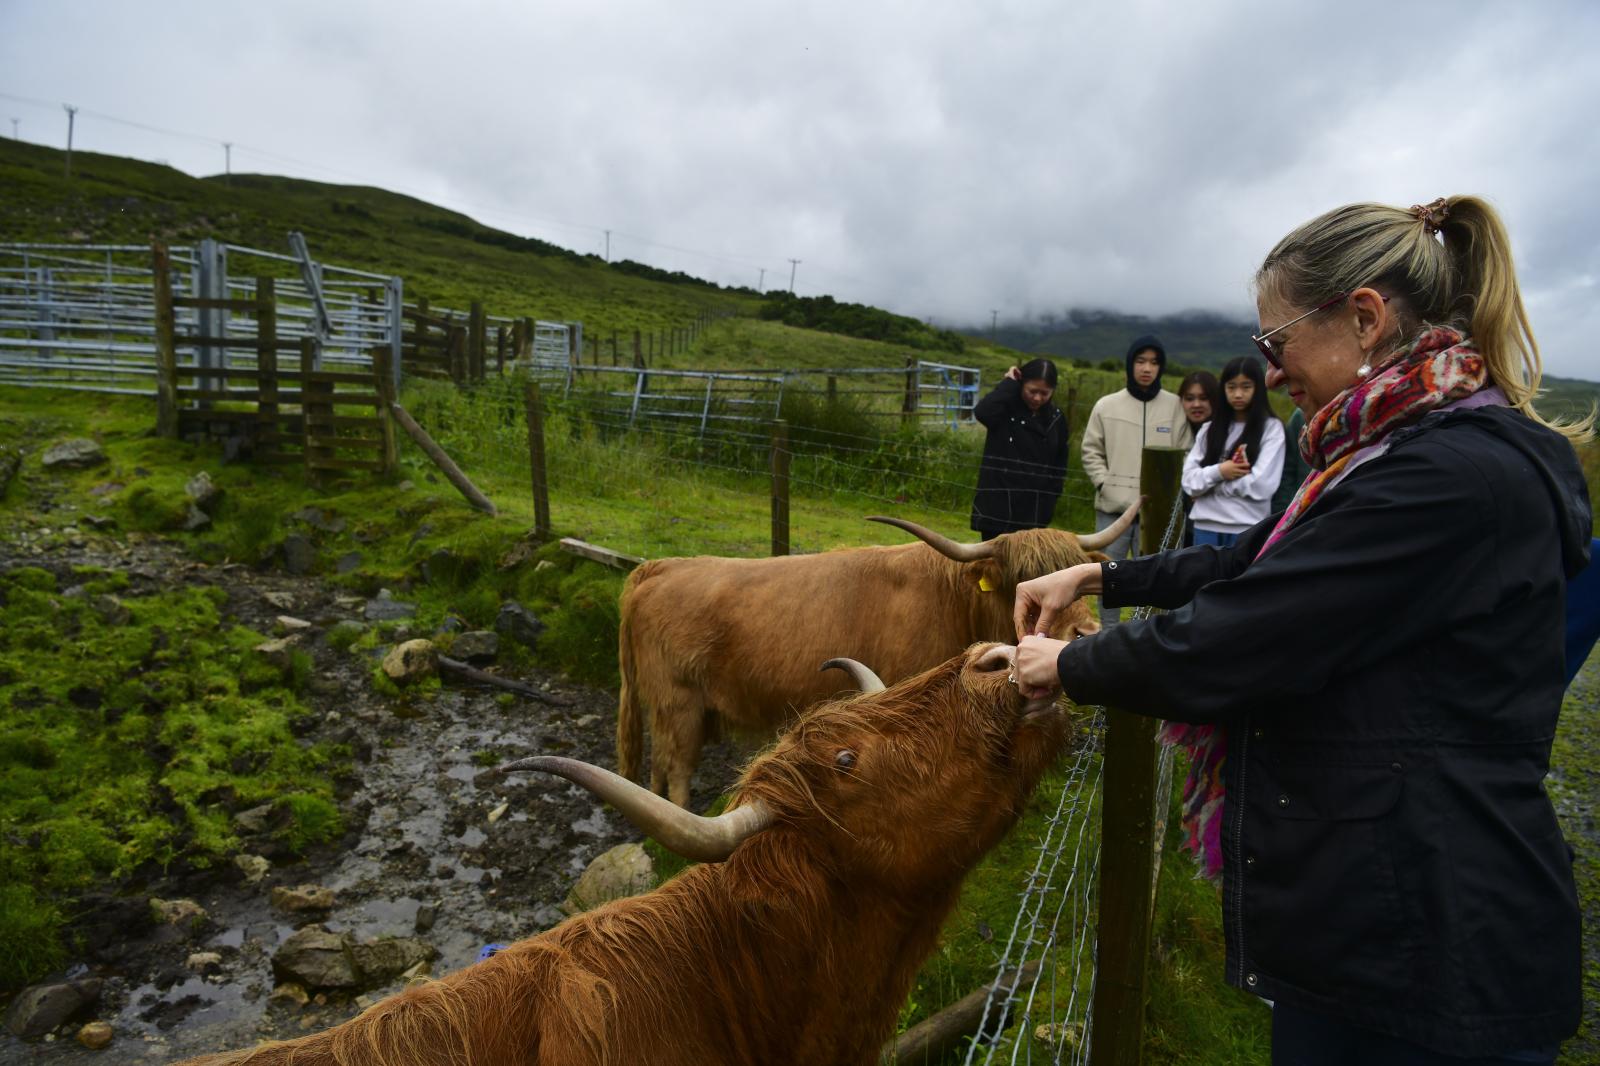 Image from Daily Life UK - Isle of Skye, West coast of Scotland and that's Harry...